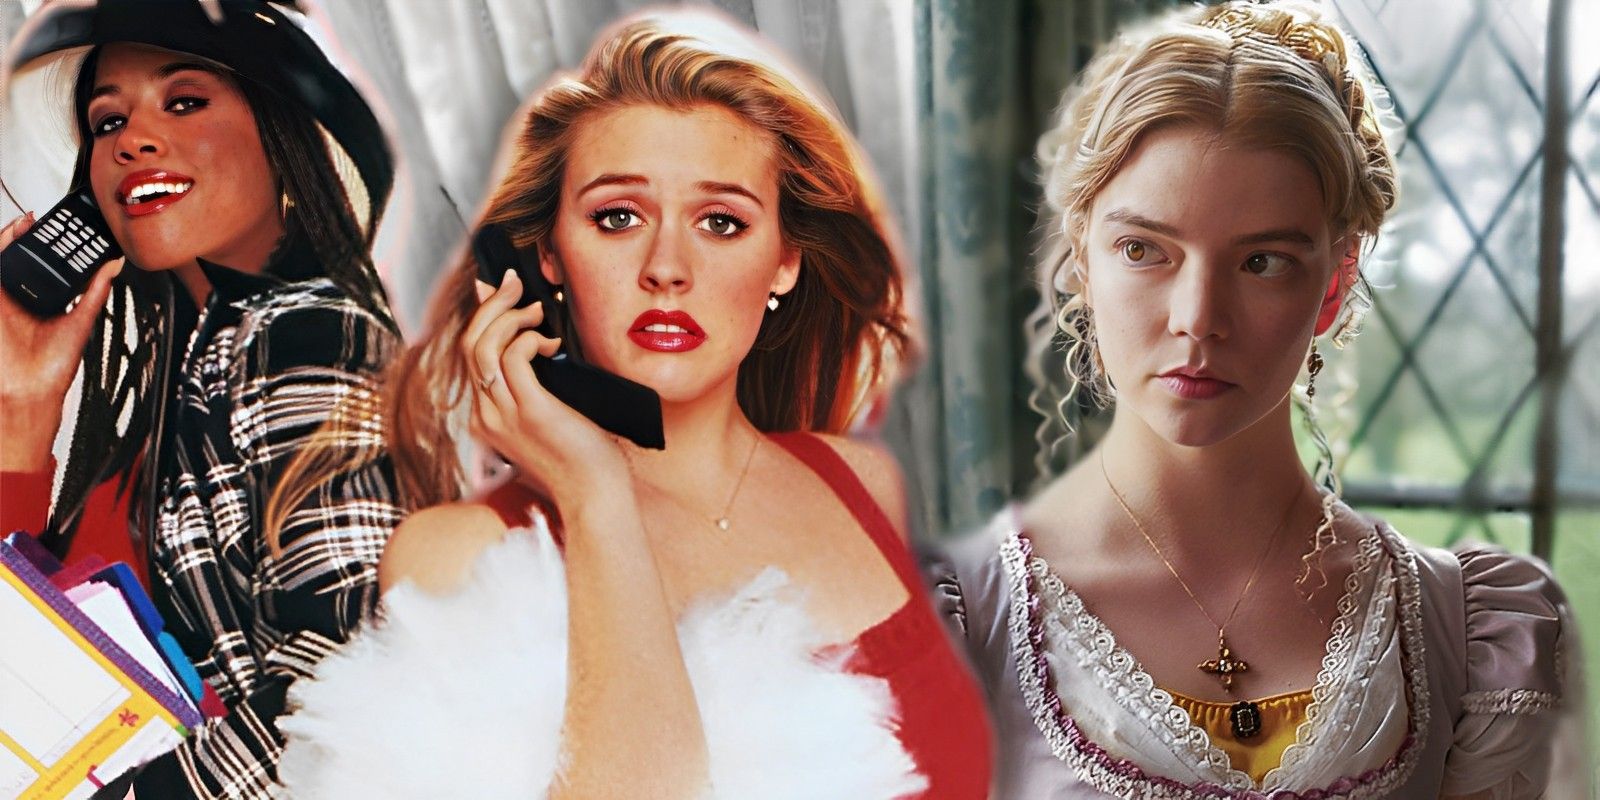 Alicia Silverstone as Cher in Clueless and Anya Taylor-Joy as Emma in Emma